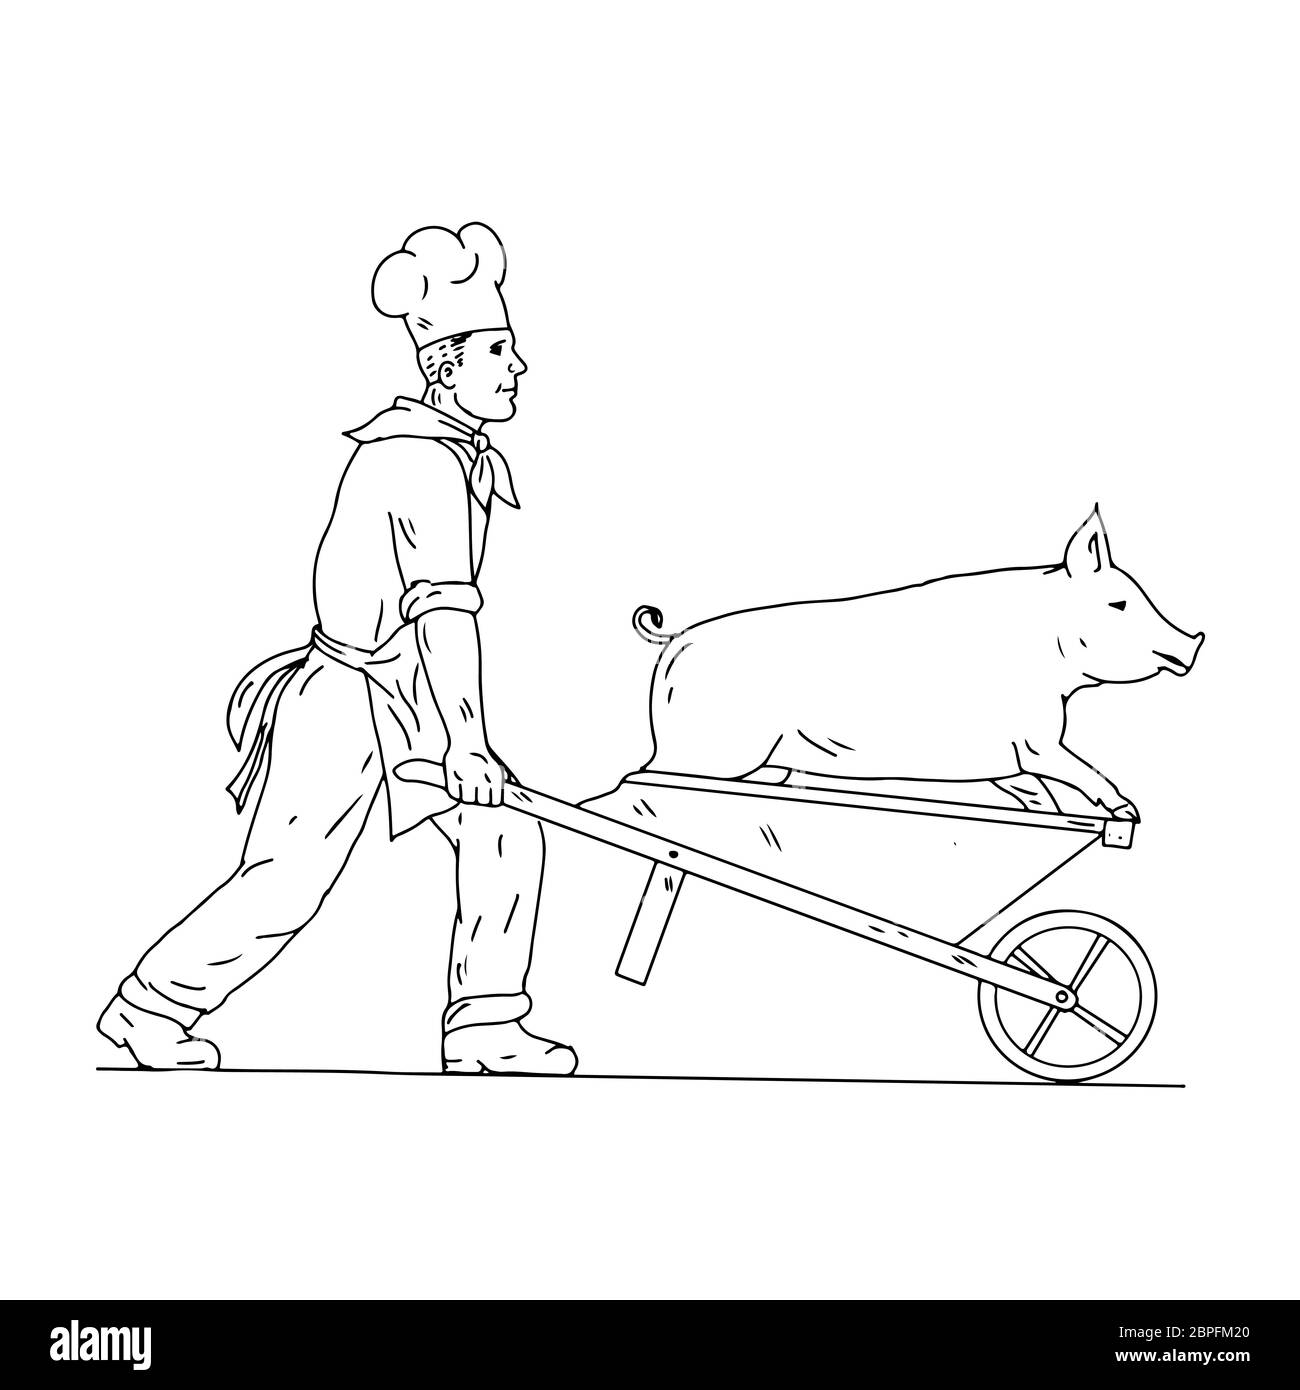 Drawing sketch style illustration of a chef, cook, baker or butcher with wheelbarrow carrying a pig viewed from side on isolated white background in b Stock Photo